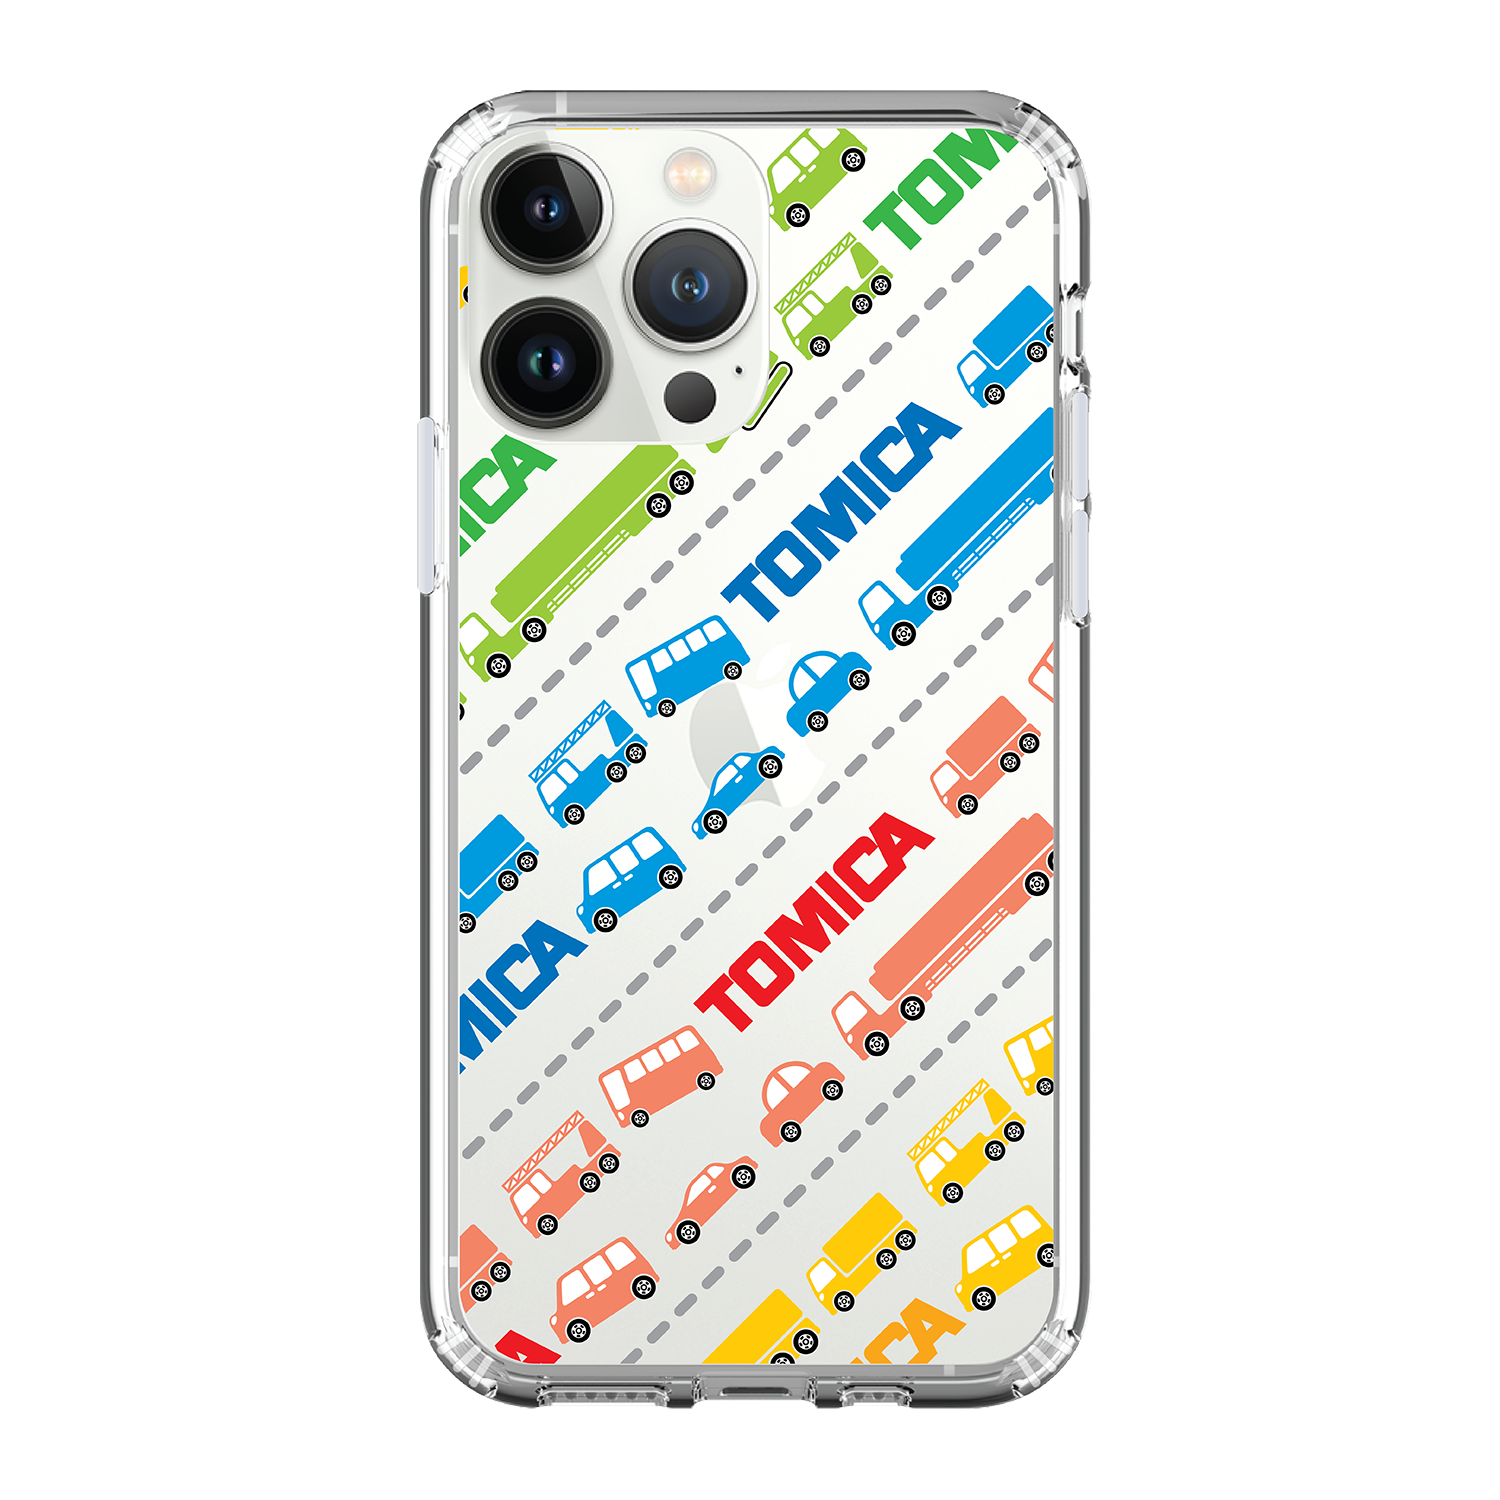 TOMICA Clear Case / iPhone Case / Android Case / Samsung Case 正版授權 專利設計 全包邊氣囊防撞手機殼 (TOMICA08)